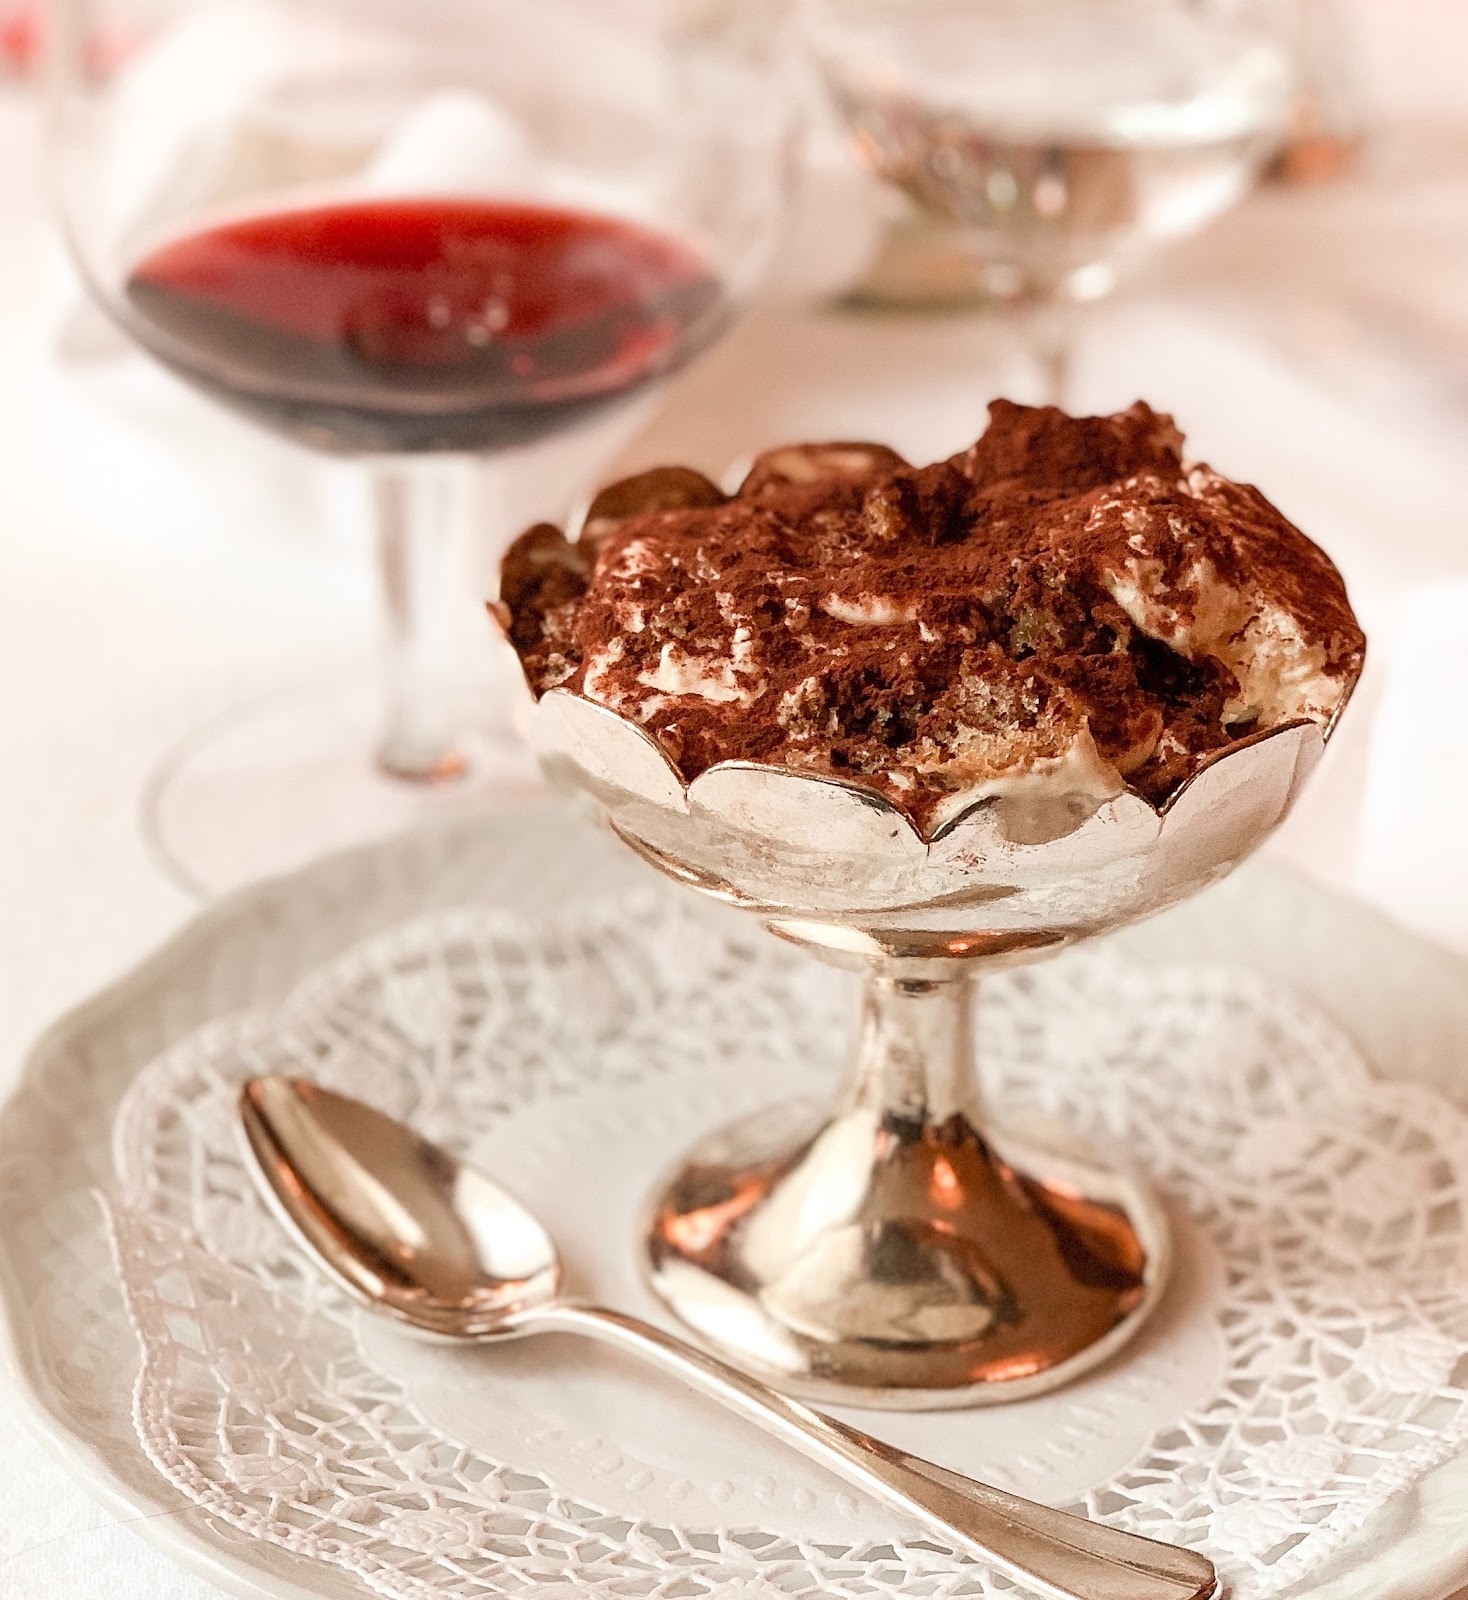 Tiramisu in a silver bowl with a spoon and glass of red wine in the background.